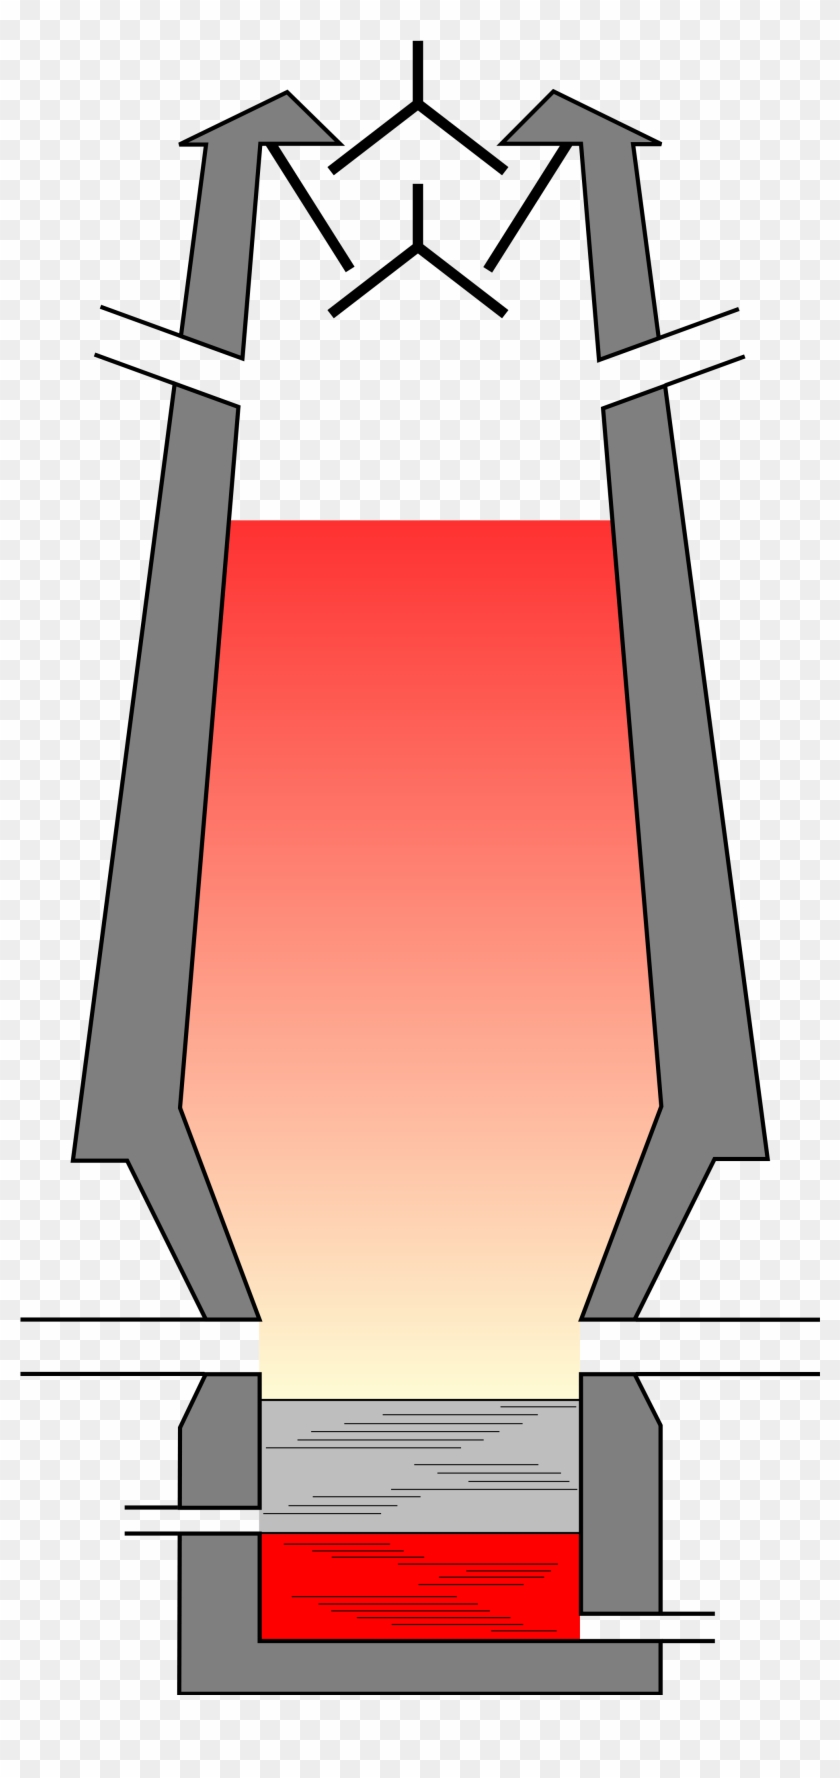 Open - Blast Furnace To Label Clipart